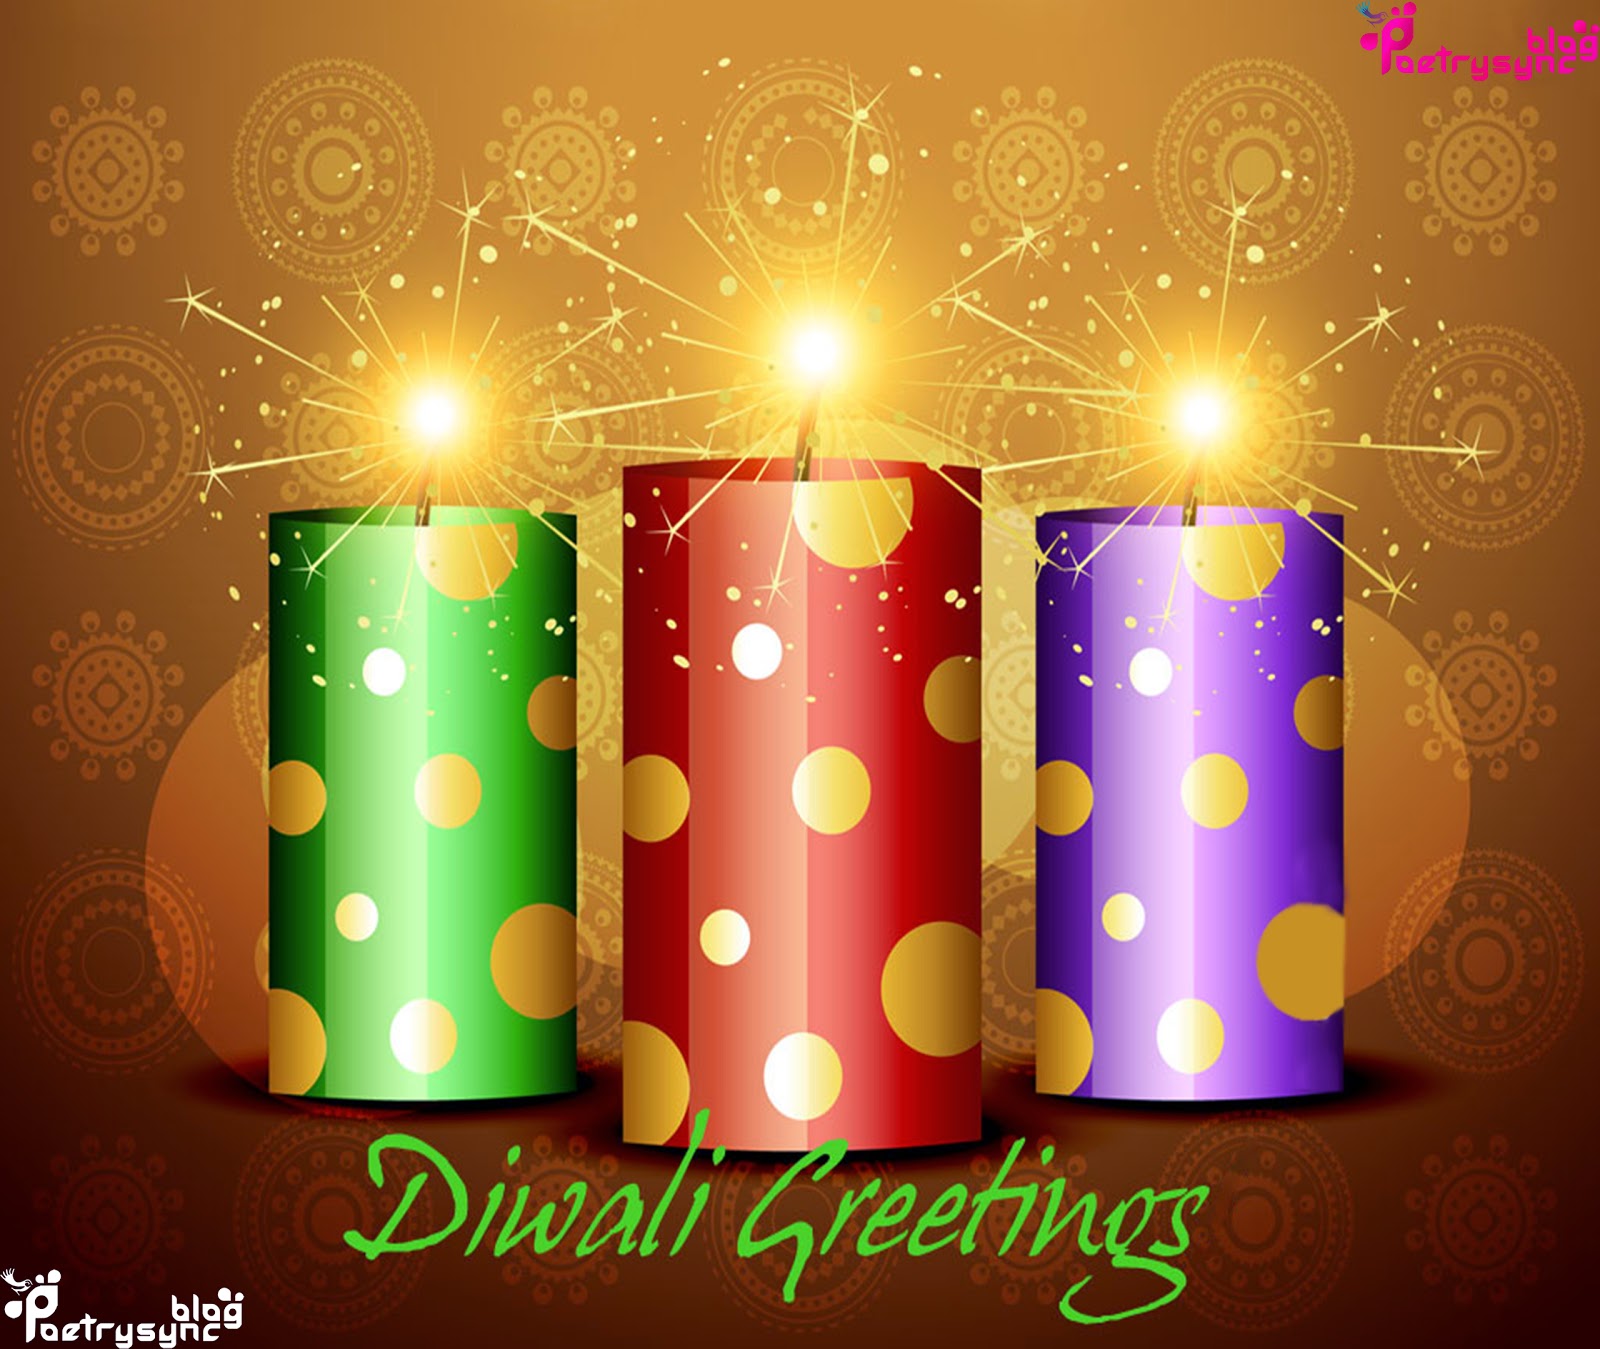 Happy-Diwali-Greeting-Image-With-Candles-By-Poetrysync1blog